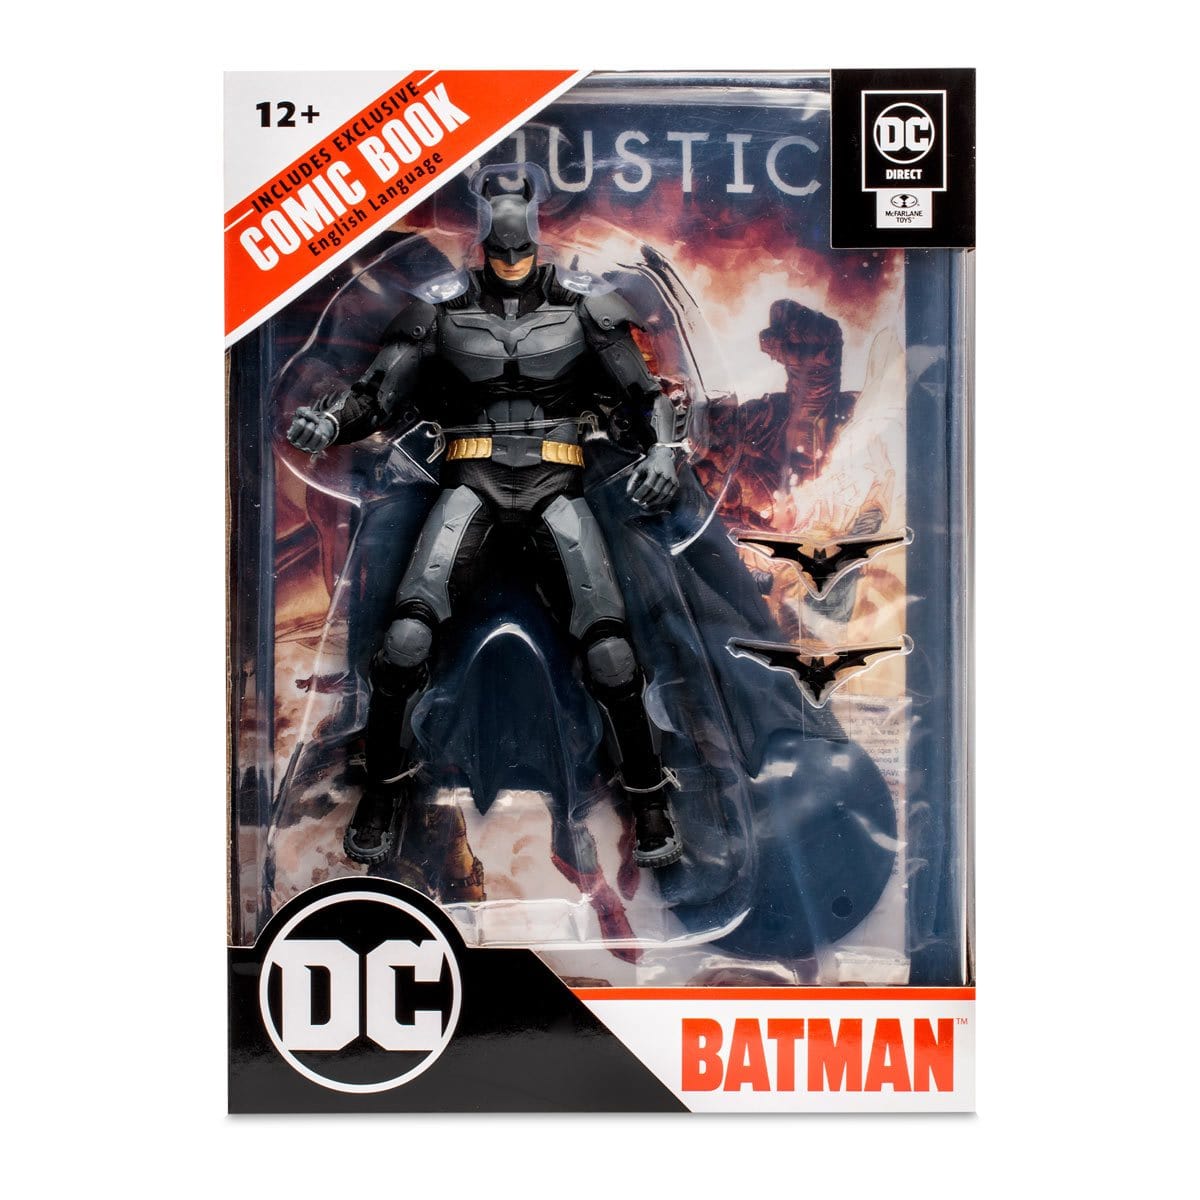 Injustice 2 Batman Page Punchers 7-Inch Scale Action Figure with Injustice Comic Book